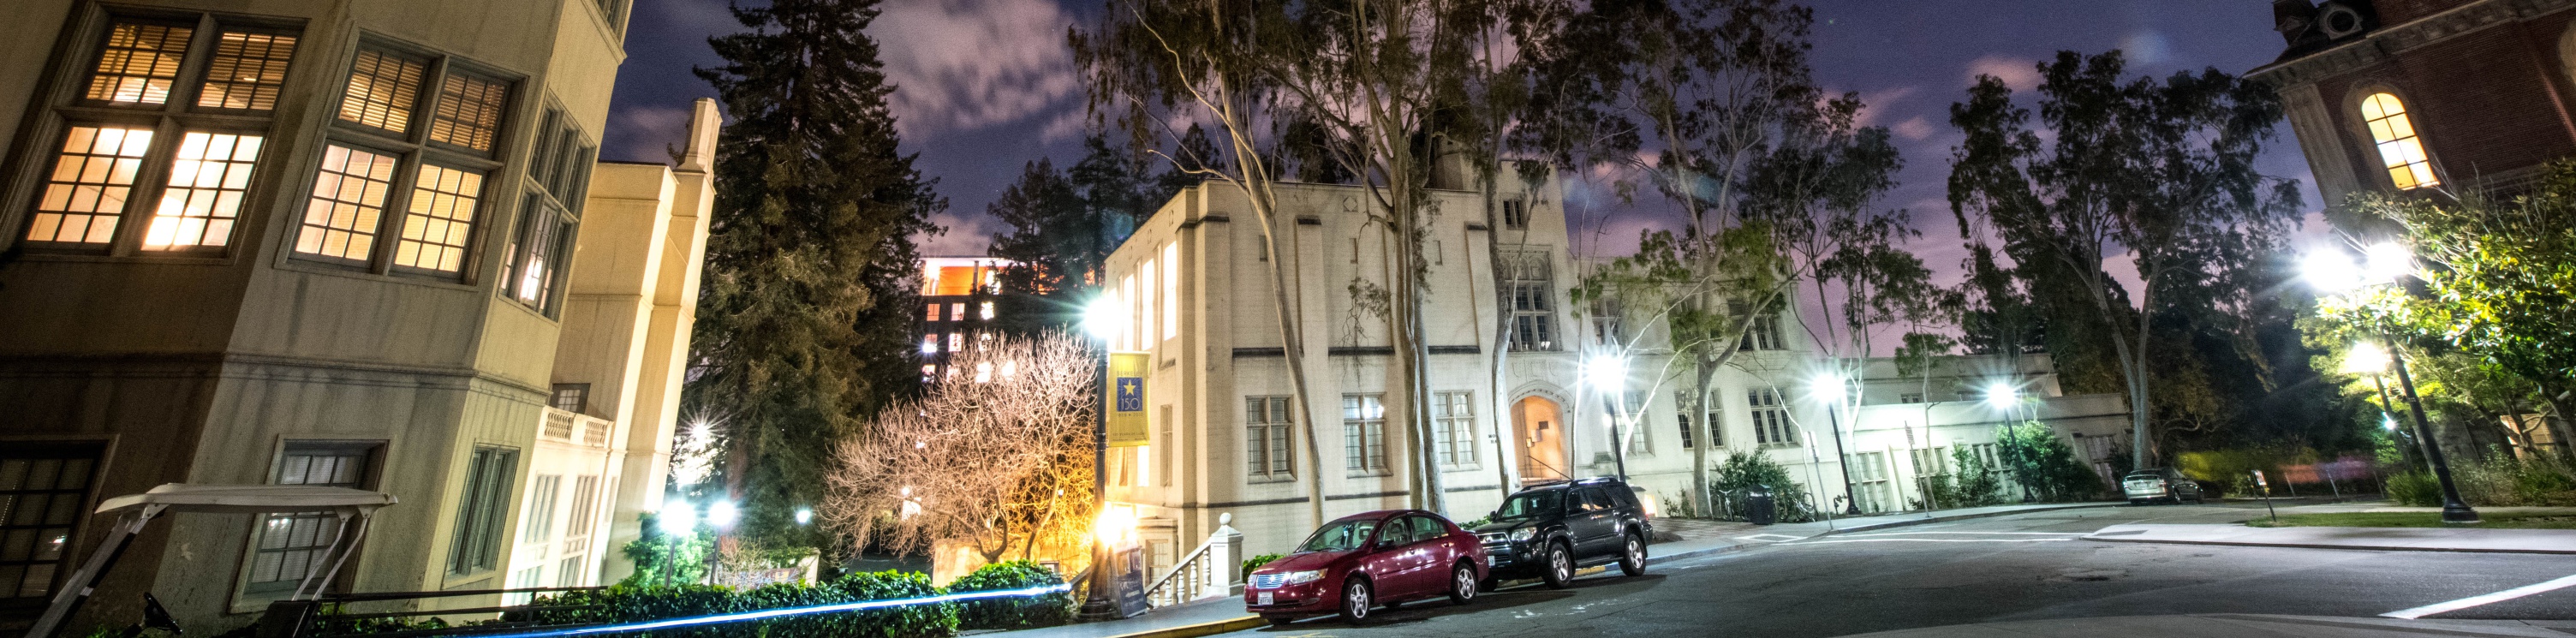 Philosophy Hall at night, viewed from Sproul Plaza